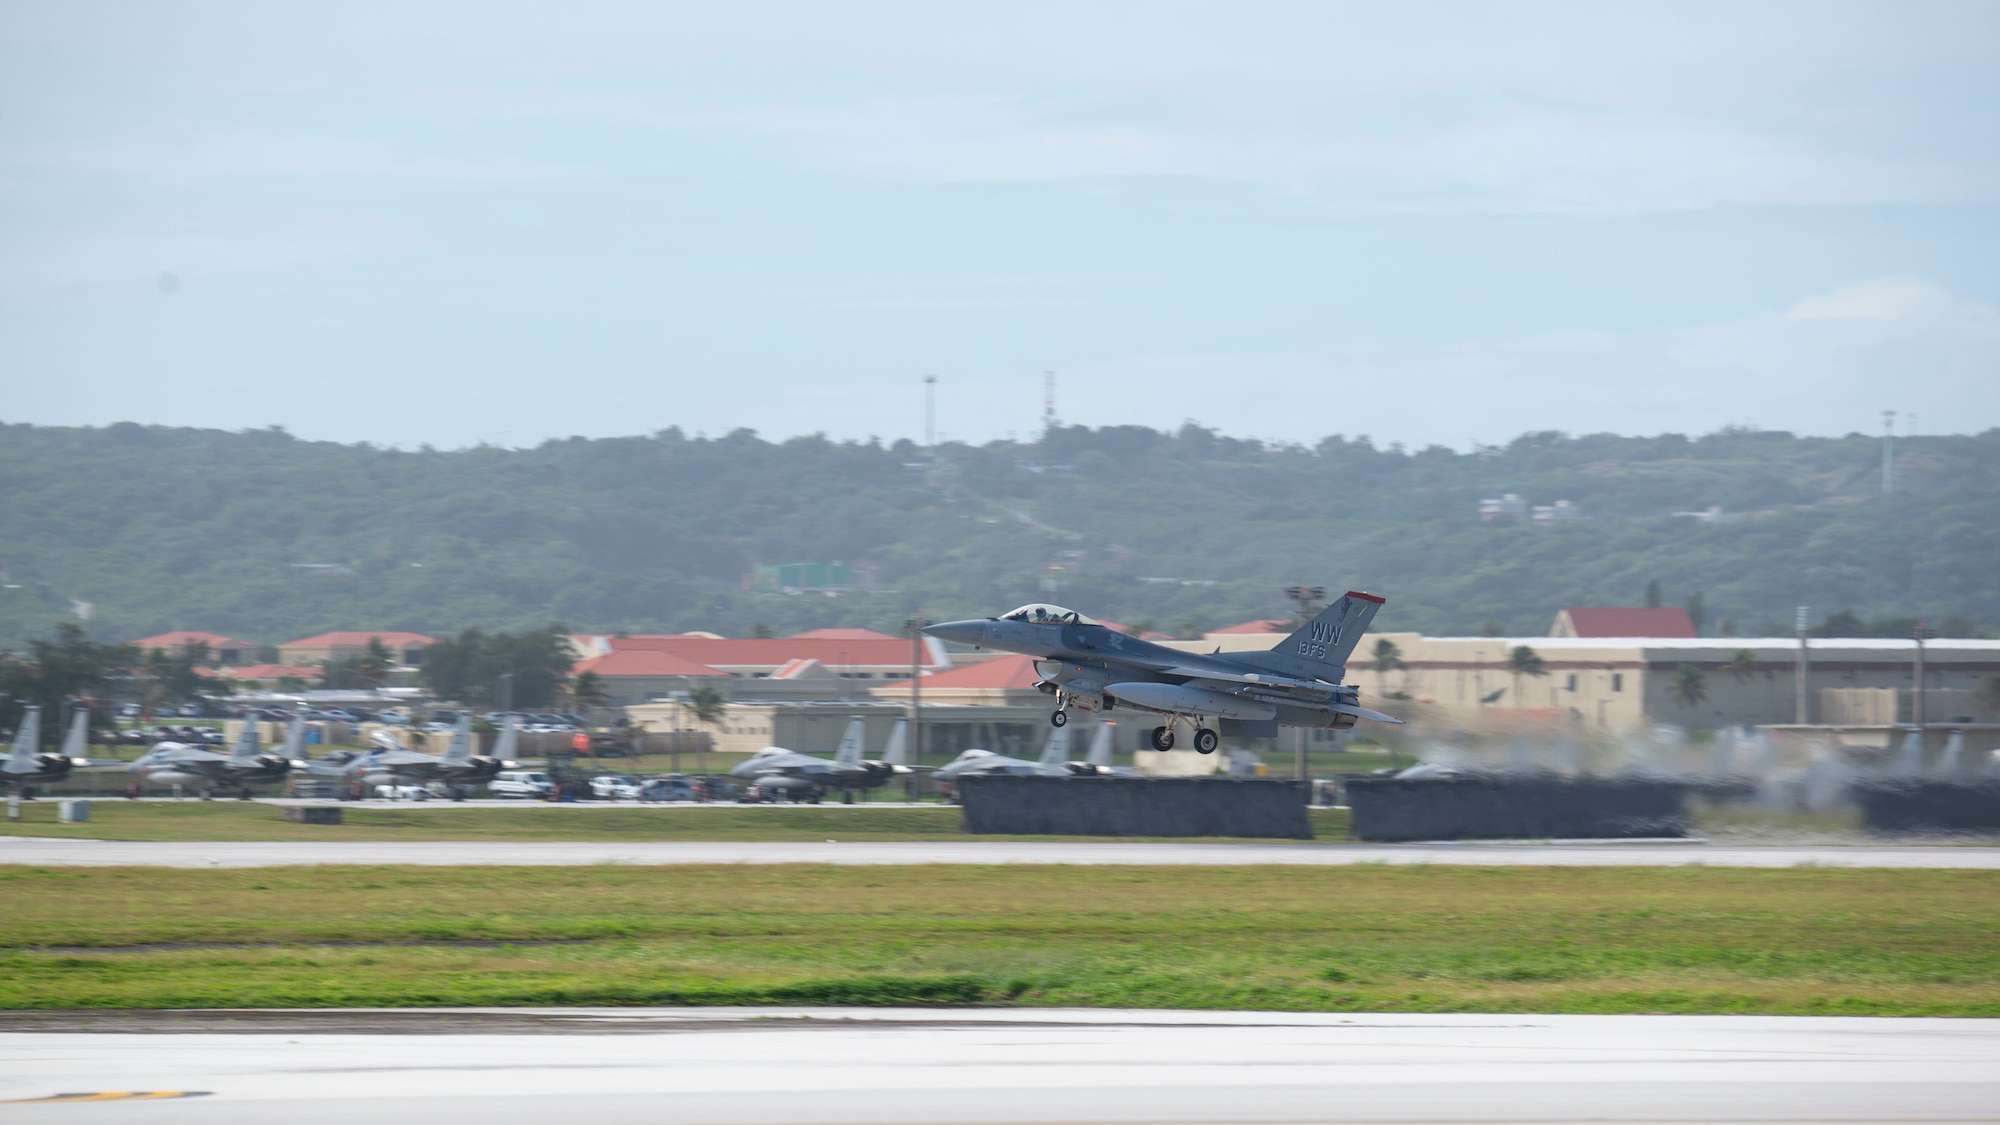 A U.S. Air Force F-16CJ Fighting Falcon assigned to 13th Fighter Squadron, Misawa Air Base, Japan, takes off during Exercise Cope North 2021 at Andersen Air Force Base, Guam, Feb. 5, 2021. Exercise Cope North 2021is an annual U.S. Pacific Air Forces joint/combined, trilateral field training exercise occurring Feb. 3-19, 2021. The exercise includes participants from the U.S. Air Force, U.S. Navy, U.S. Marine Corps, Japan Air Self-Defense Force and Royal Australian Air Force conducted primarily at Andersen AFB. (U.S. Air Force photo by Senior Airman Aubree Owens)